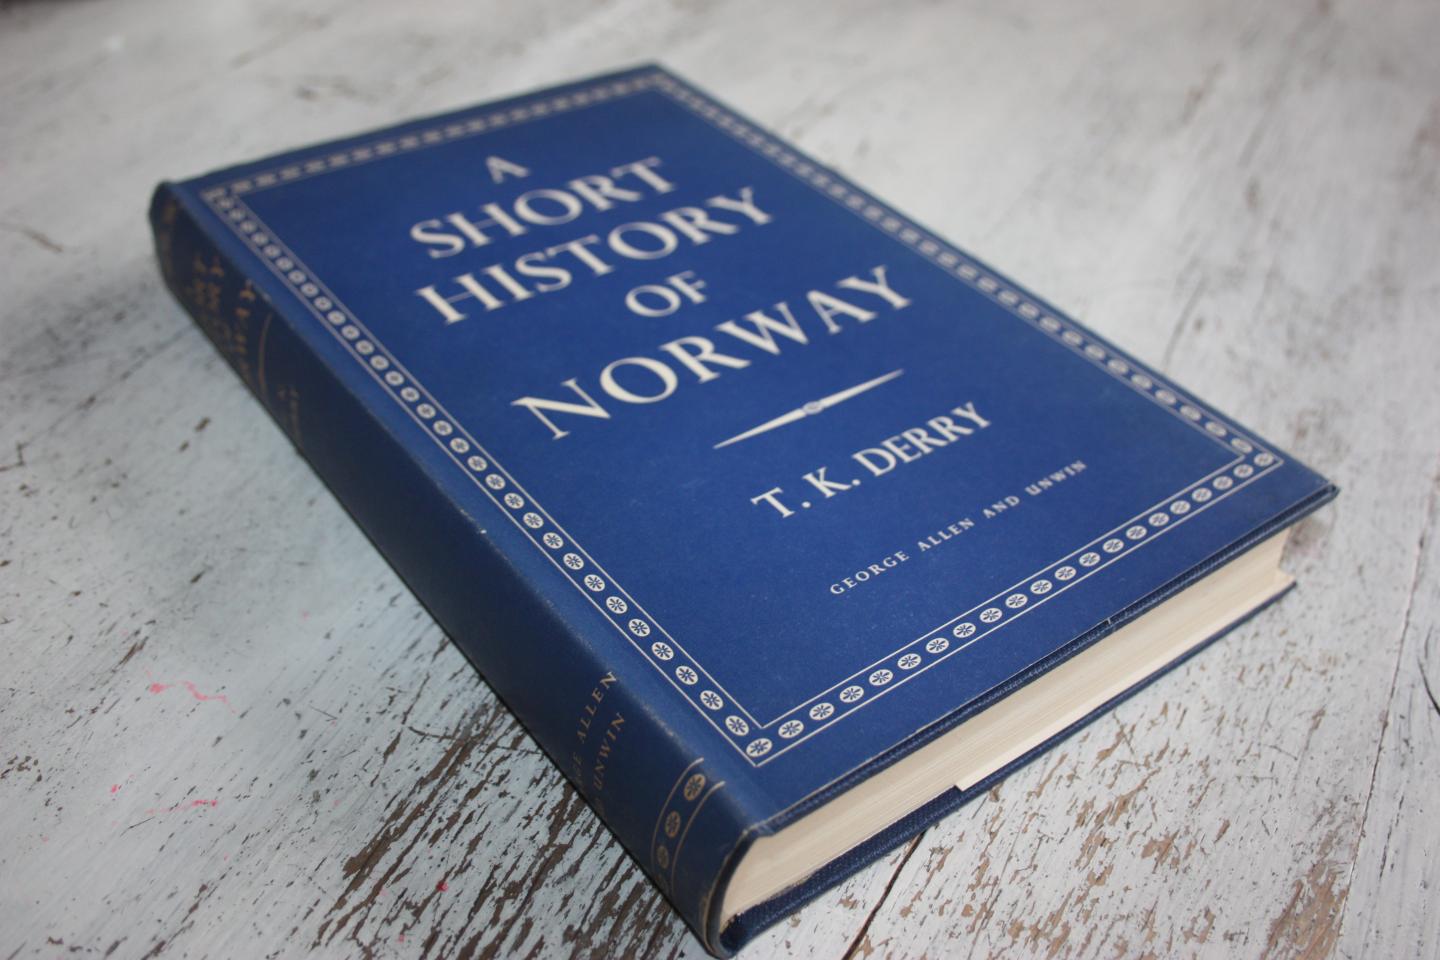 Derry, T.K. - A SHORT HISTORY OF NORWAY